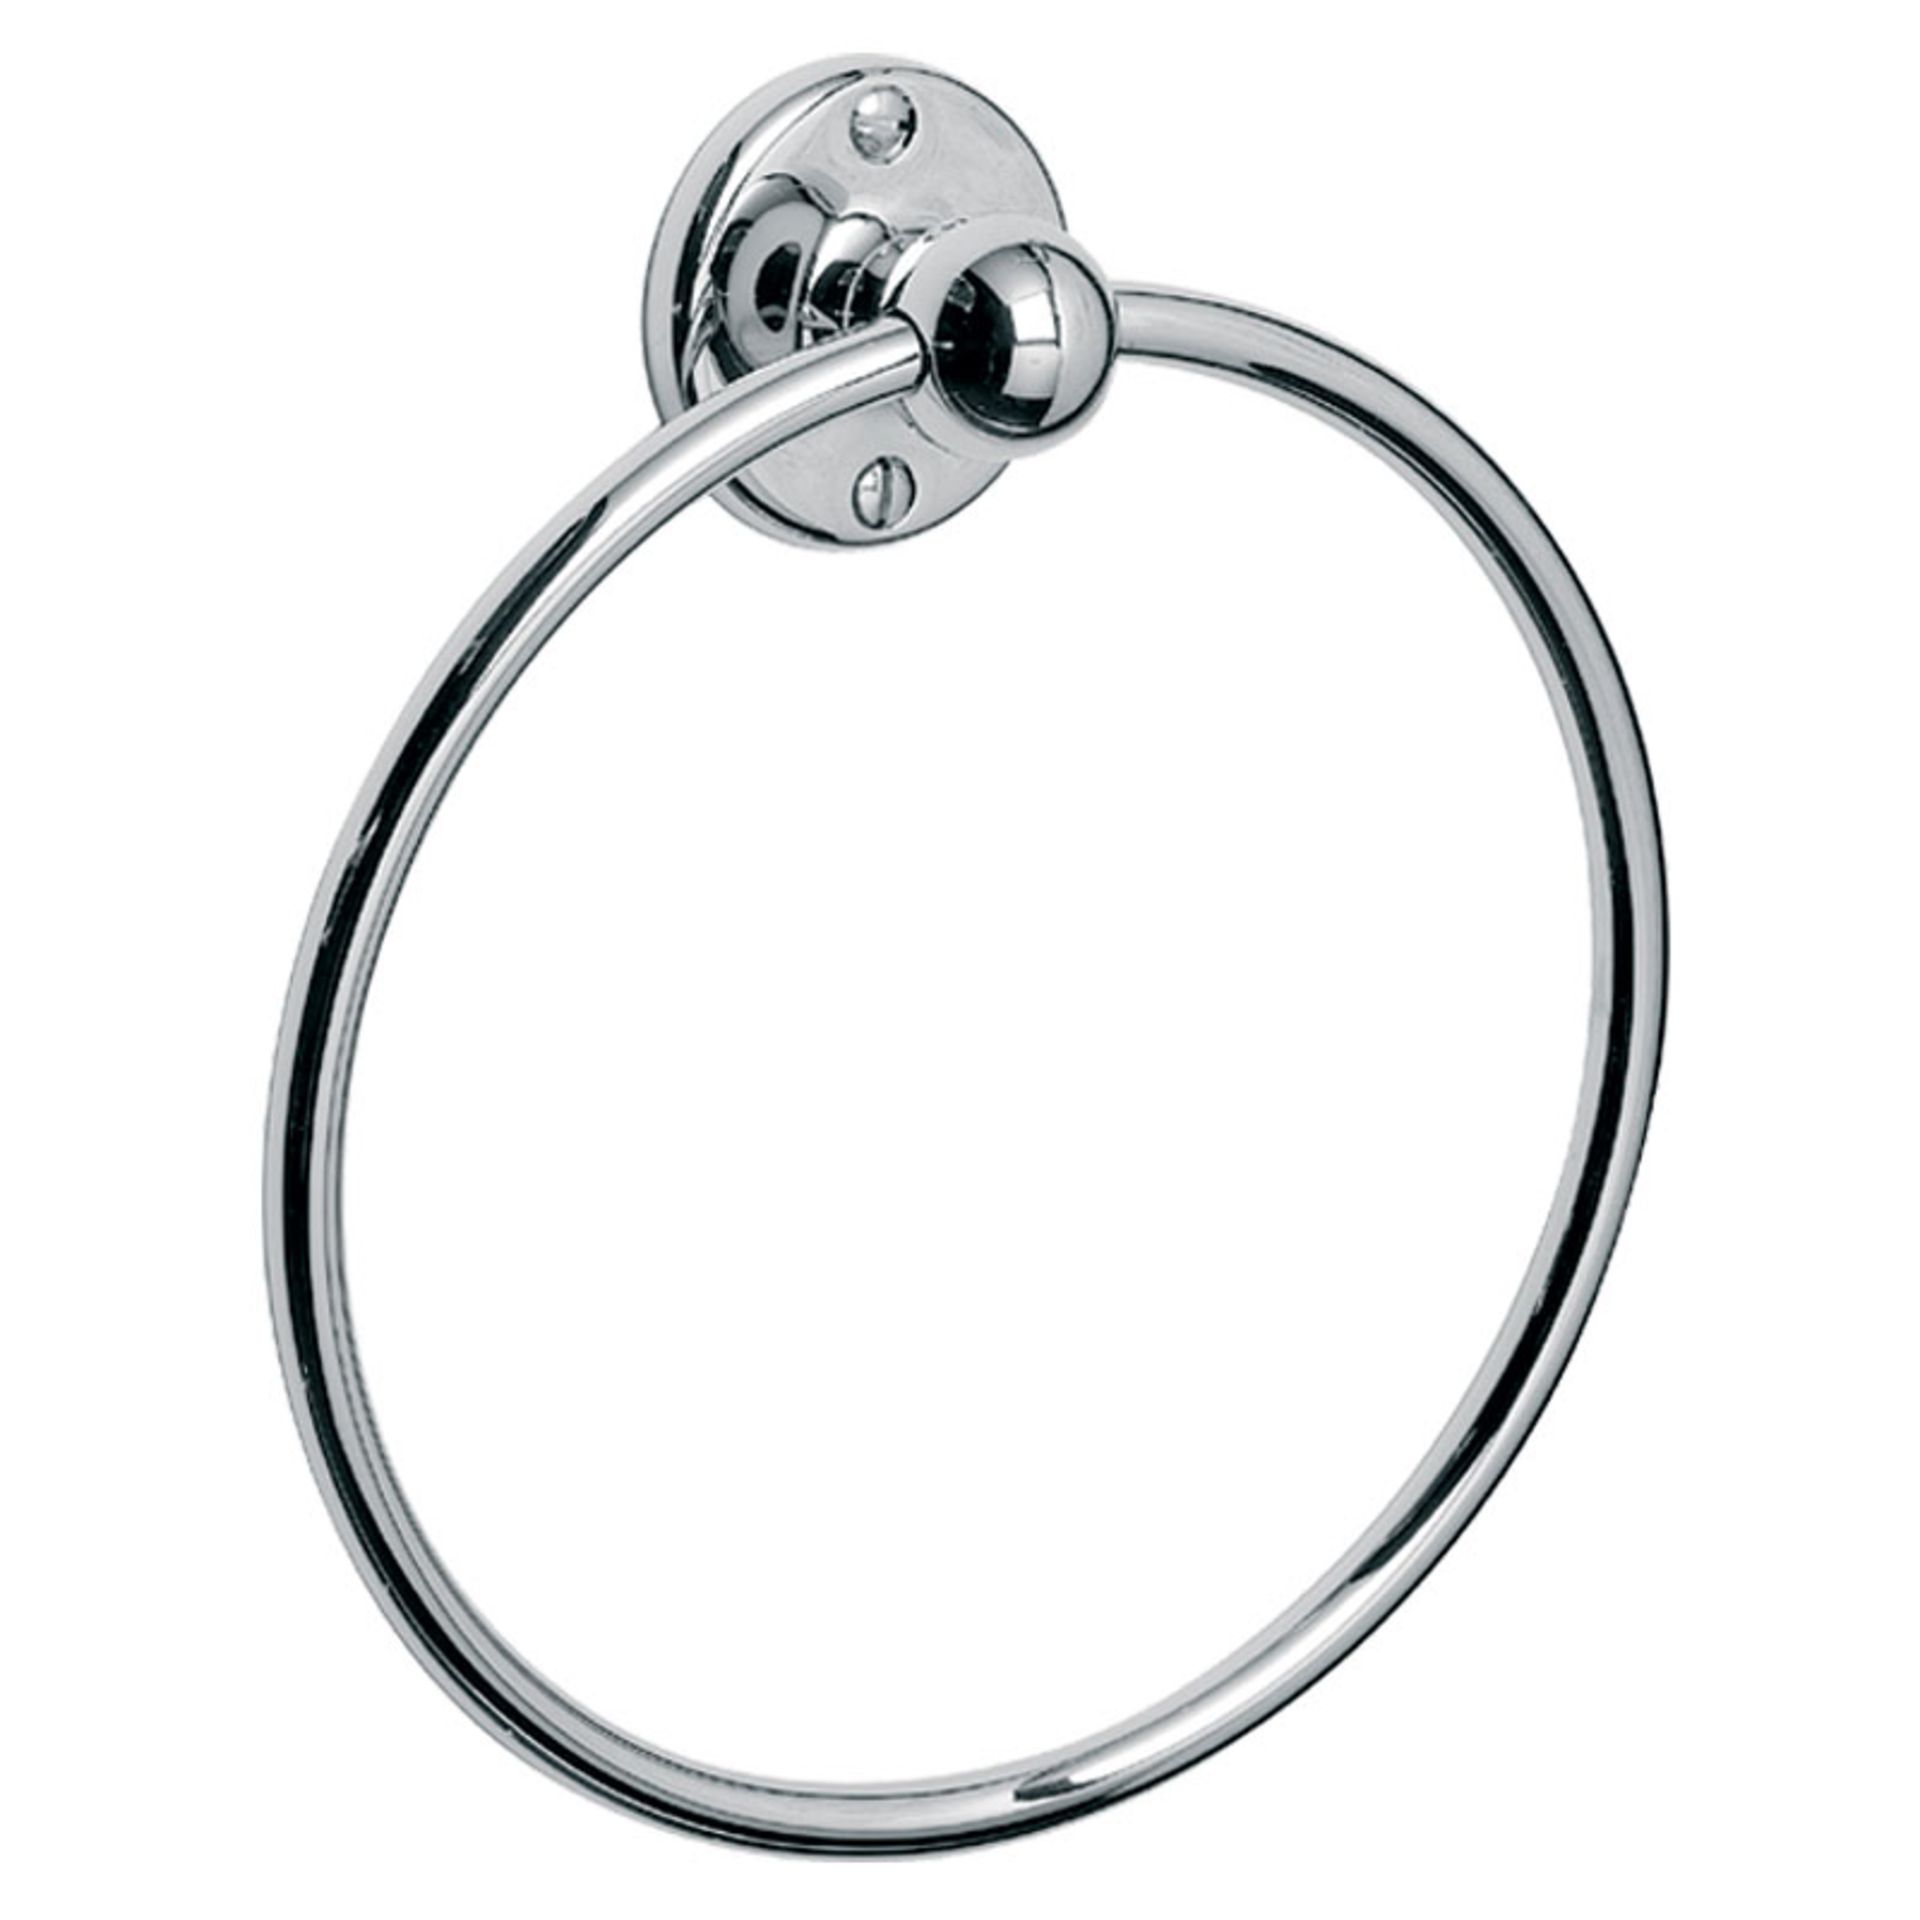 (L300) Eva Wavy Silver Towel Ring - Add that modern sleek finish to your bathroom, to give it that